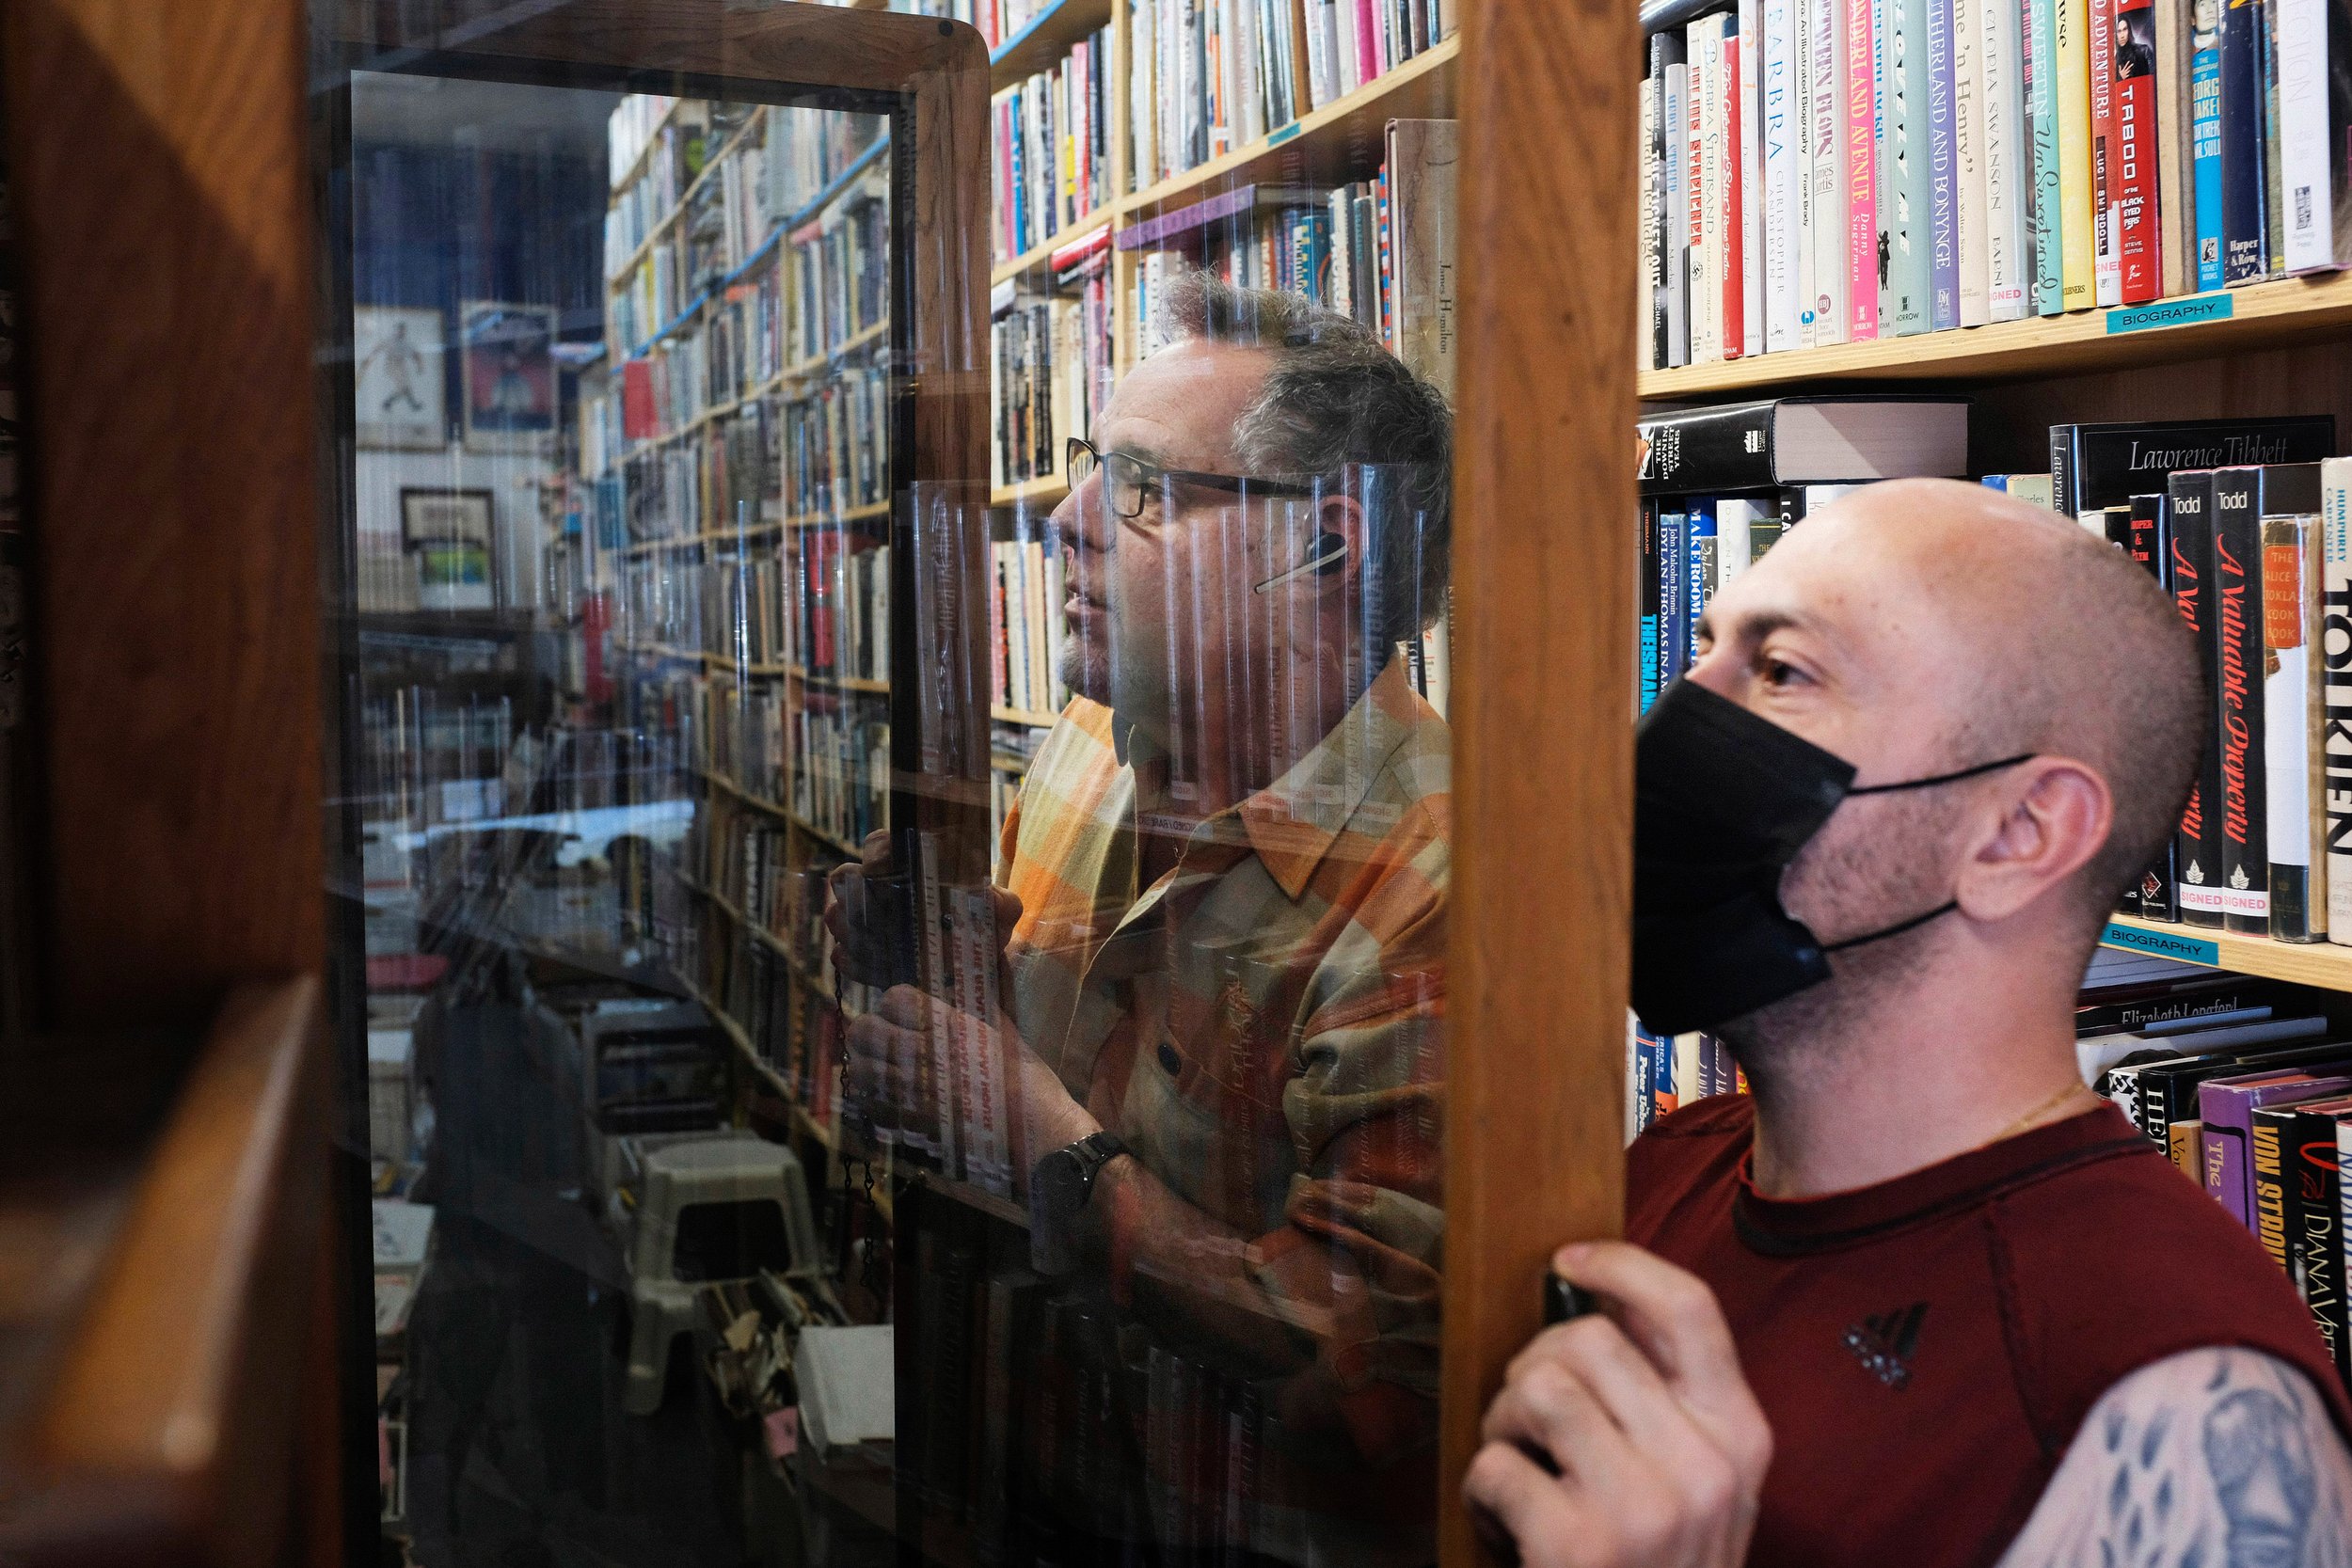  David Kaye (left) opens another locked book case for Reza Asgari (cq) (right), who asks about signed books of actor autobiographies. Asgari visits the store alone, since he is looking for a gift for his girlfriend. David Kaye Bookstore and Memorabil